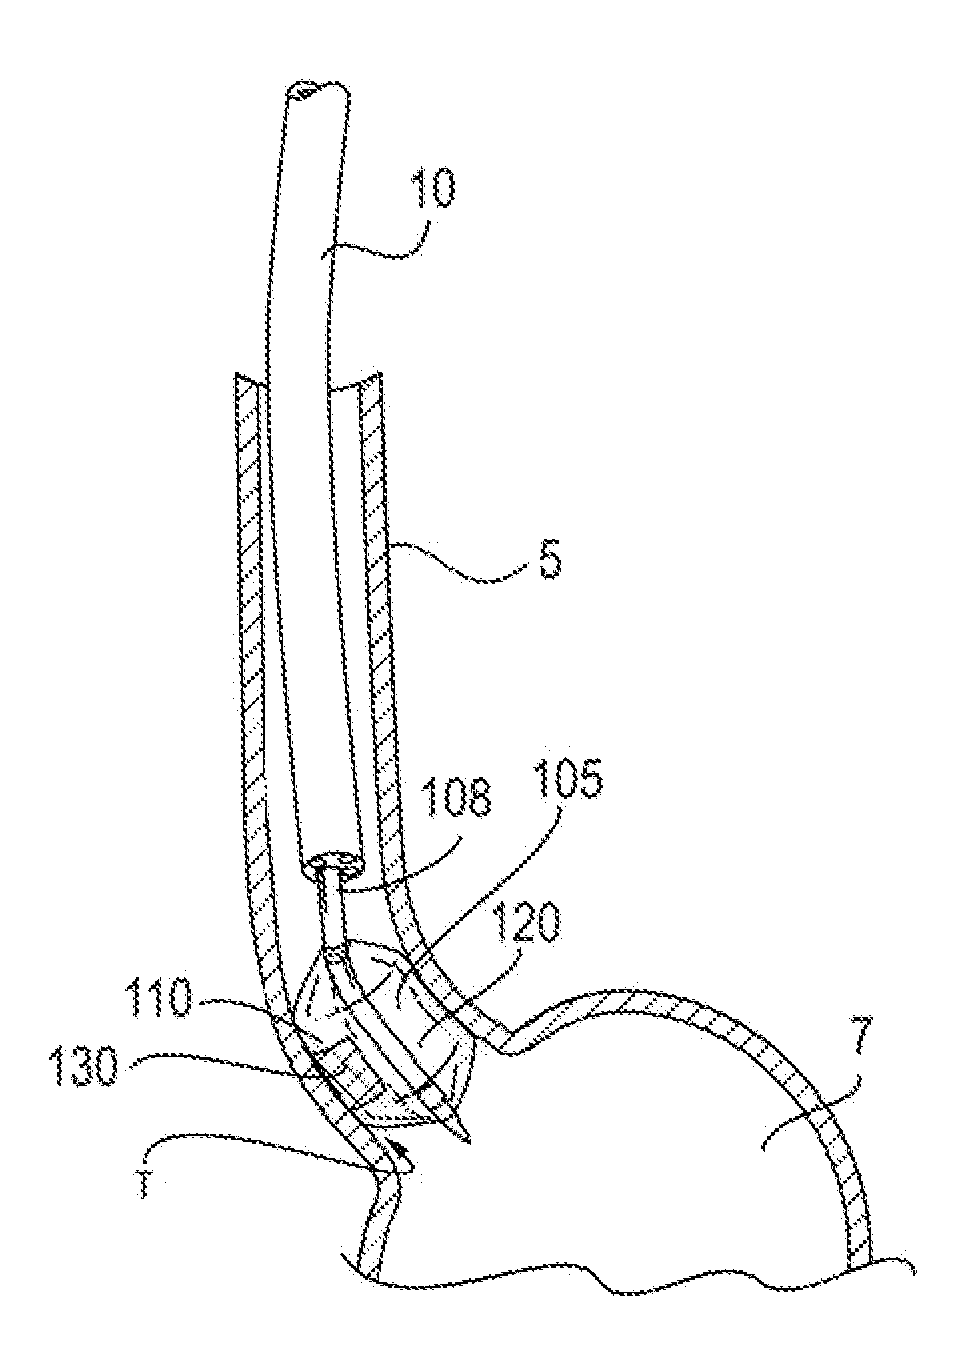 Selectively expandable operative element support structure and methods of use